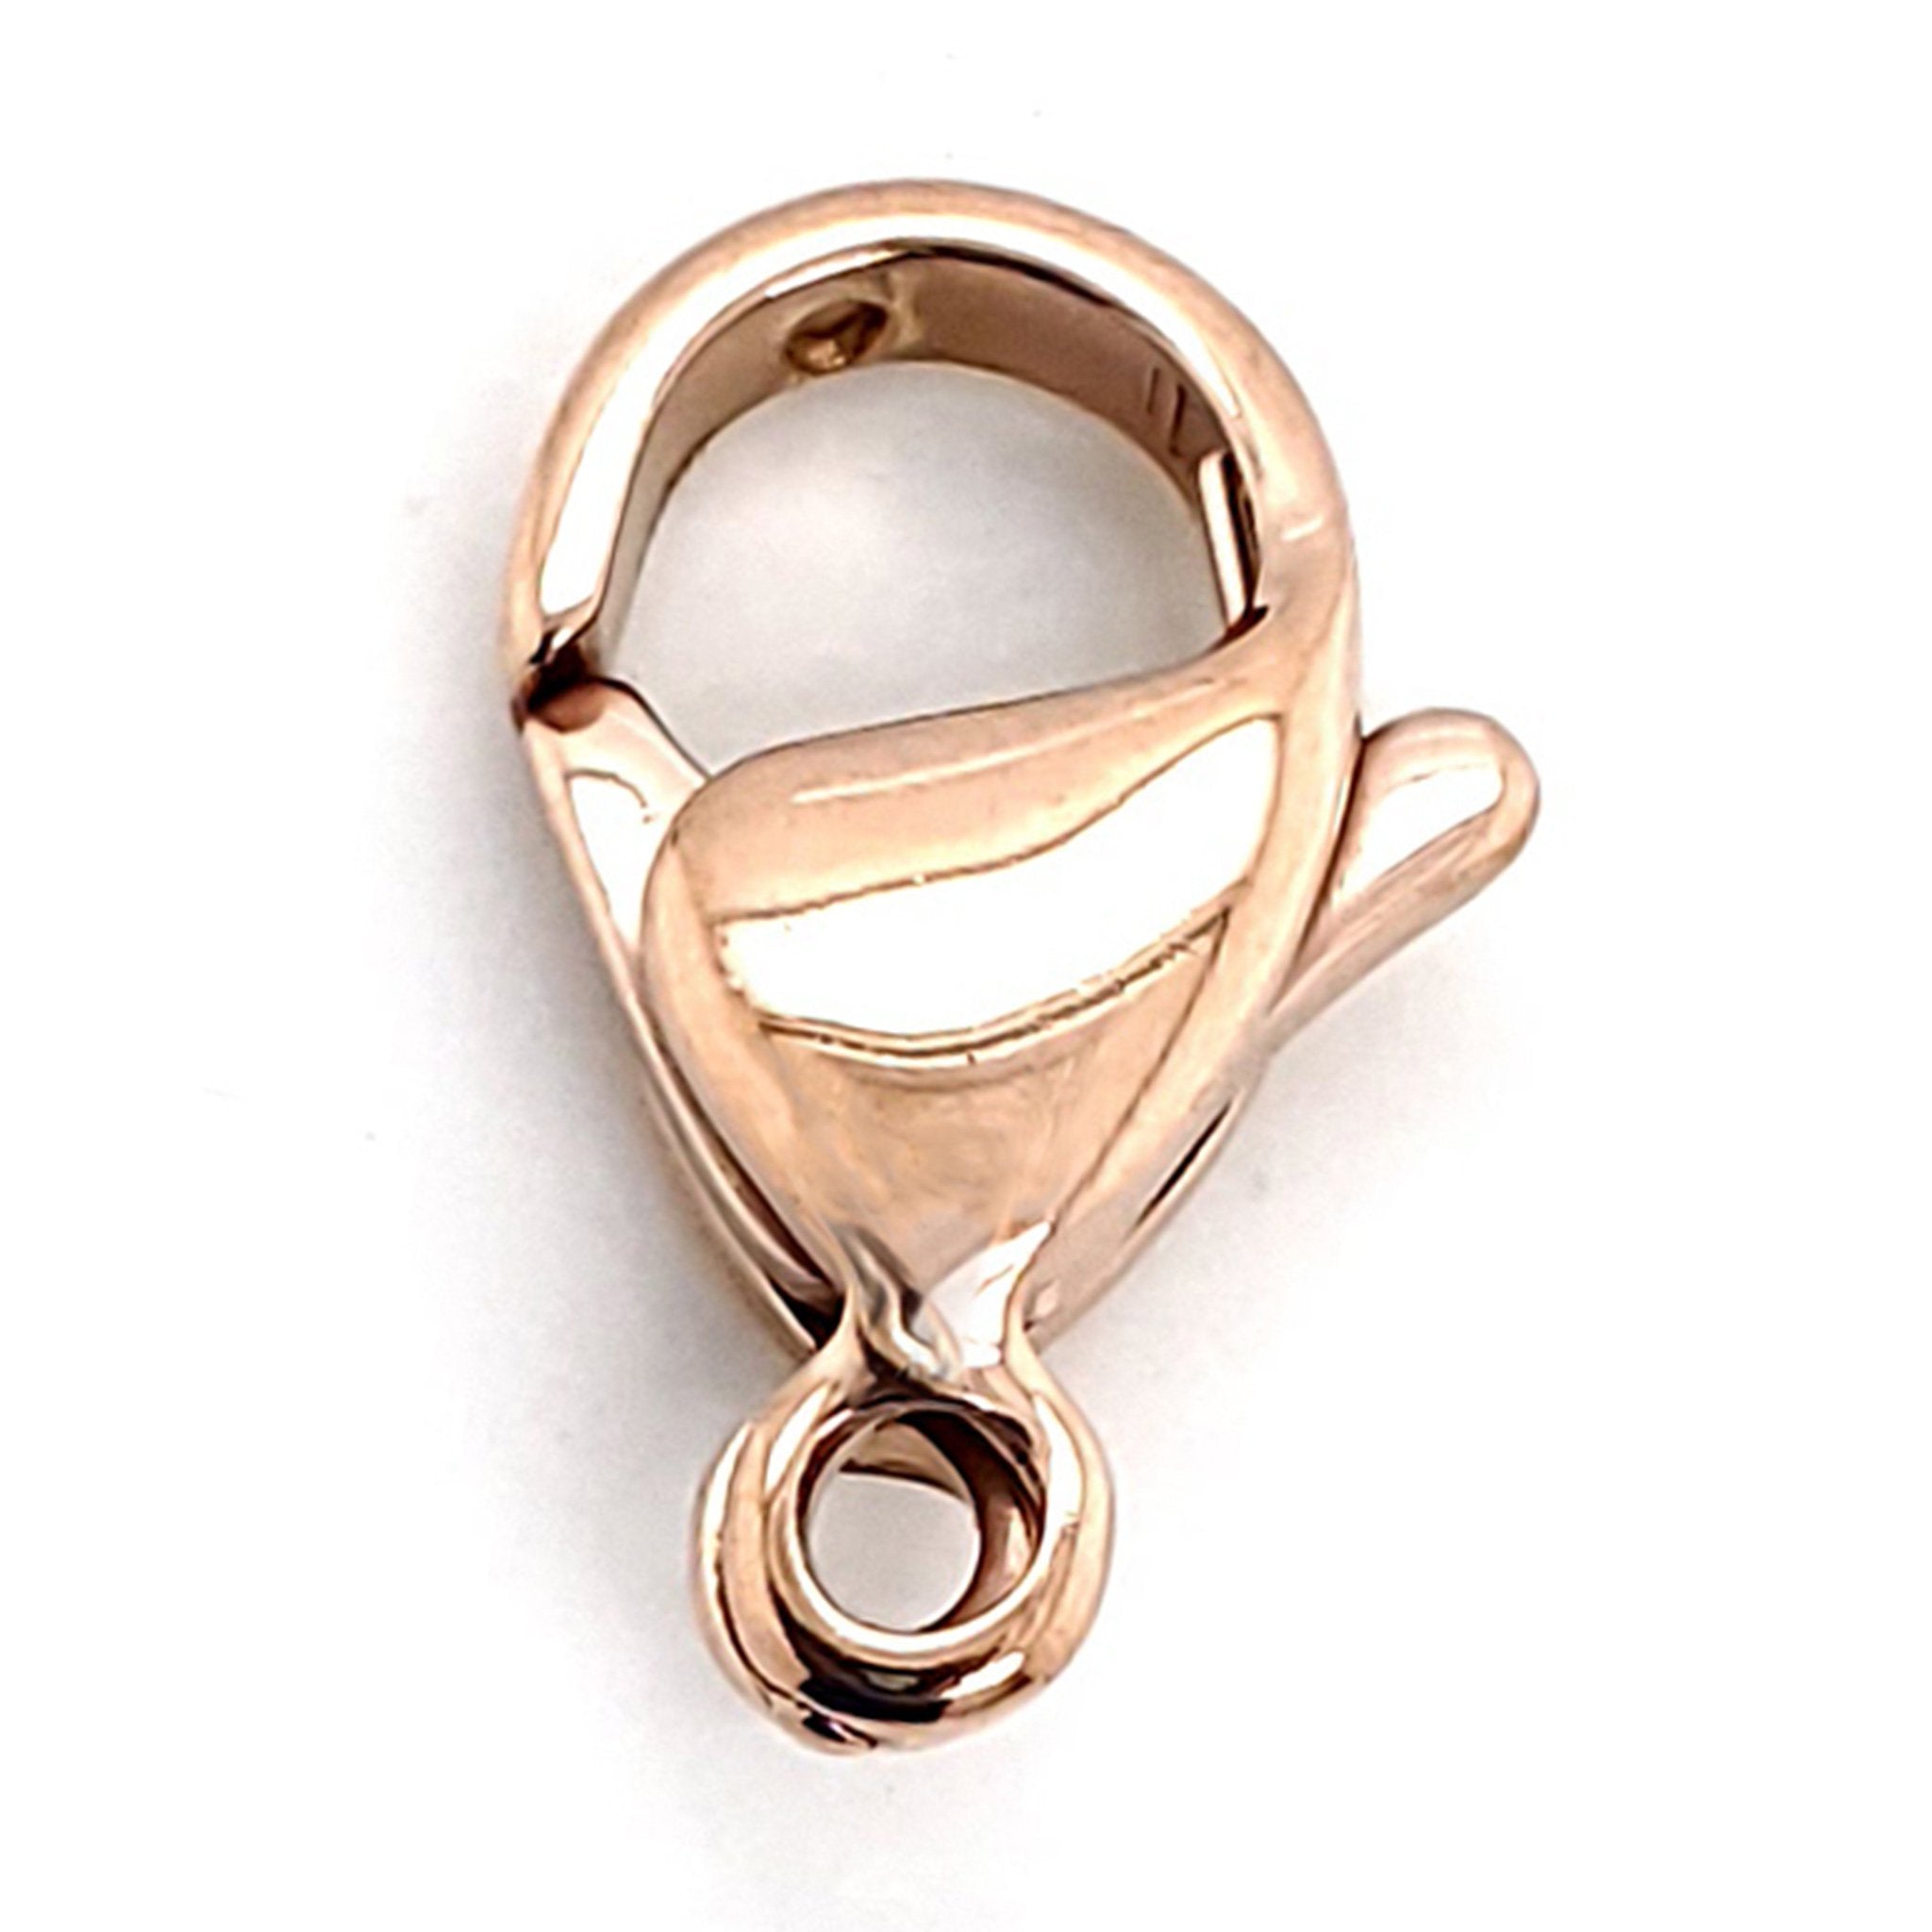 Stainless steel rose gold PVD Coated lobster clasp.